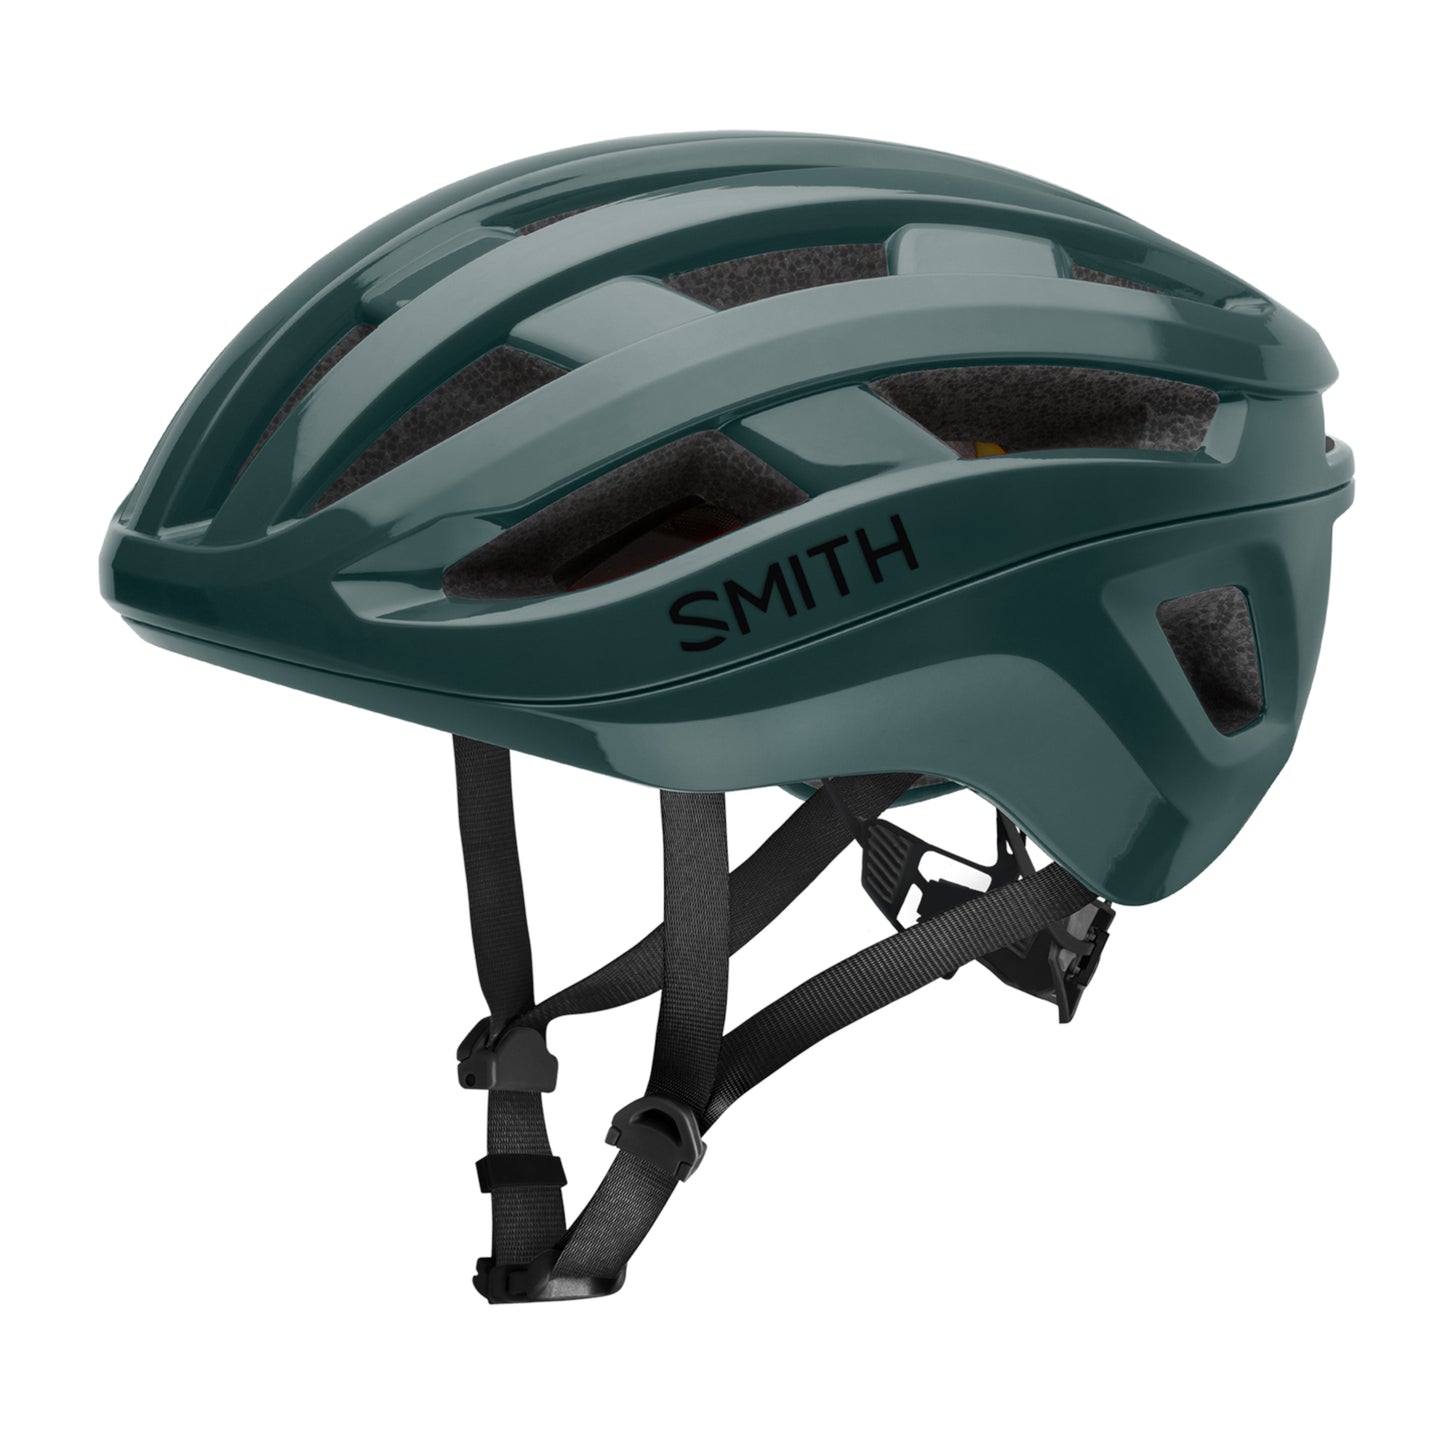 Smith Optics Persist MIPS Road Helmet White Spruce side view on Fly Rides